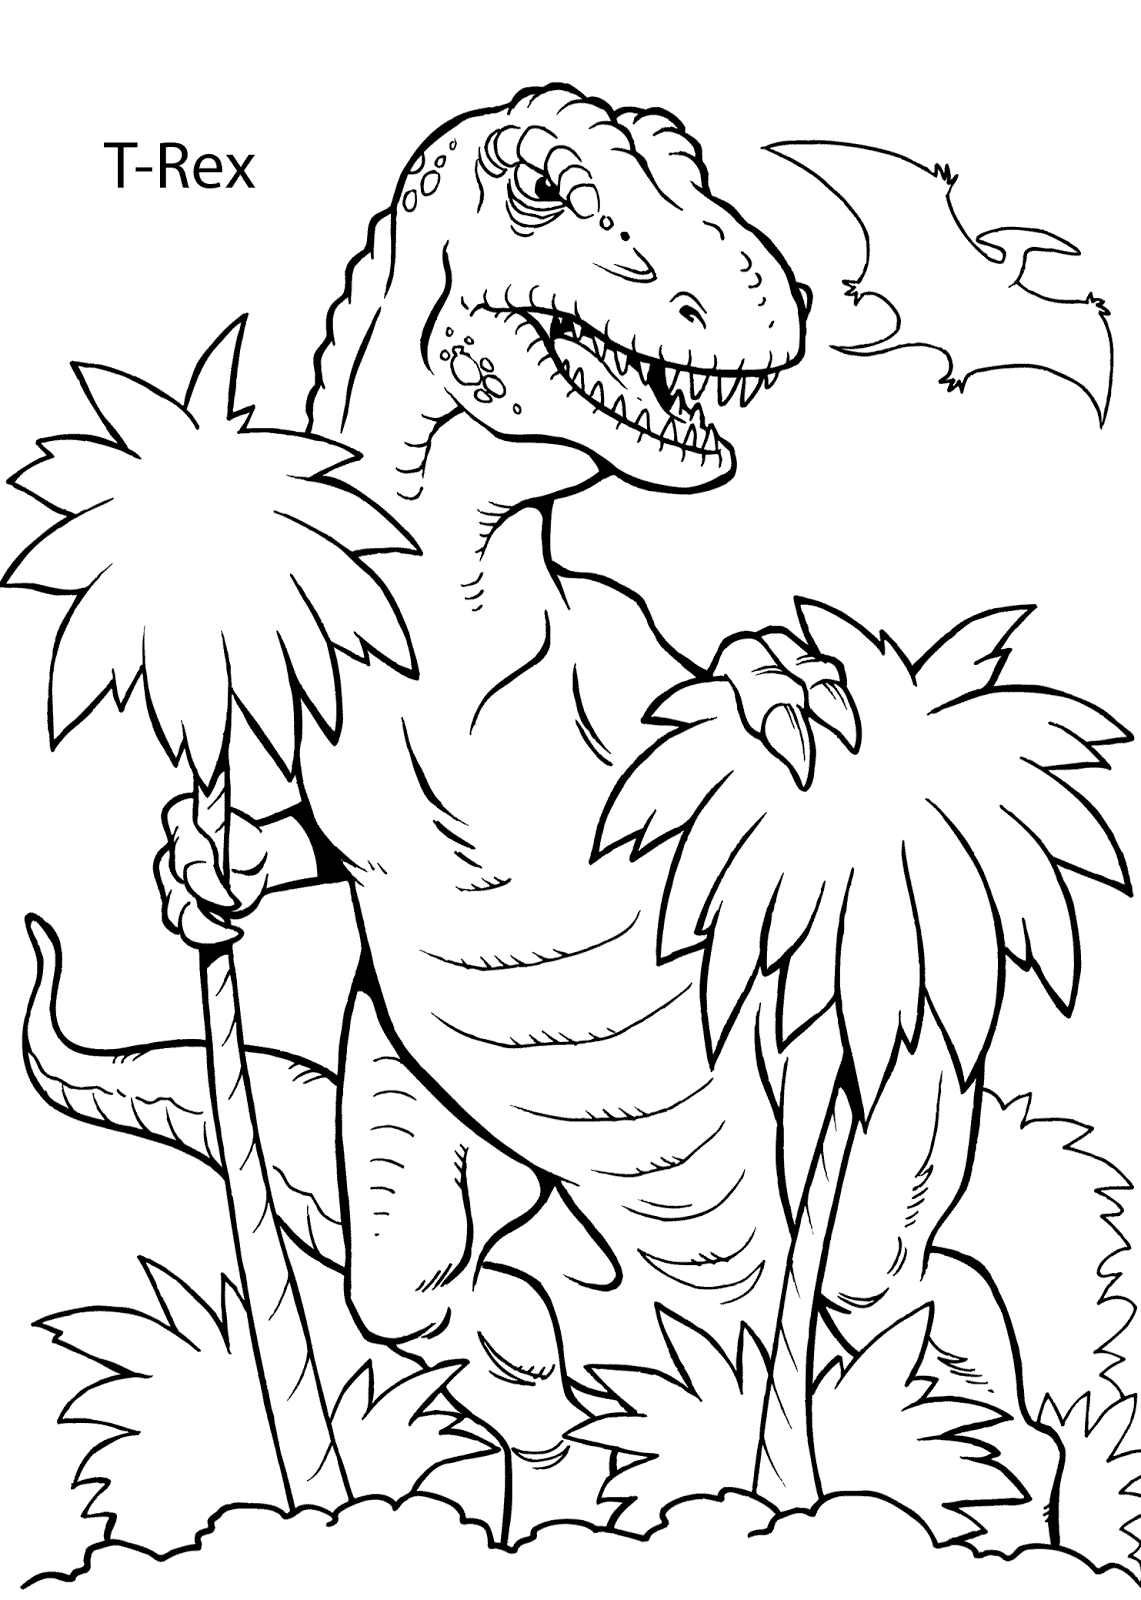 Printable Dinosaur Coloring Sheet - Best Coloring Pages For Kids